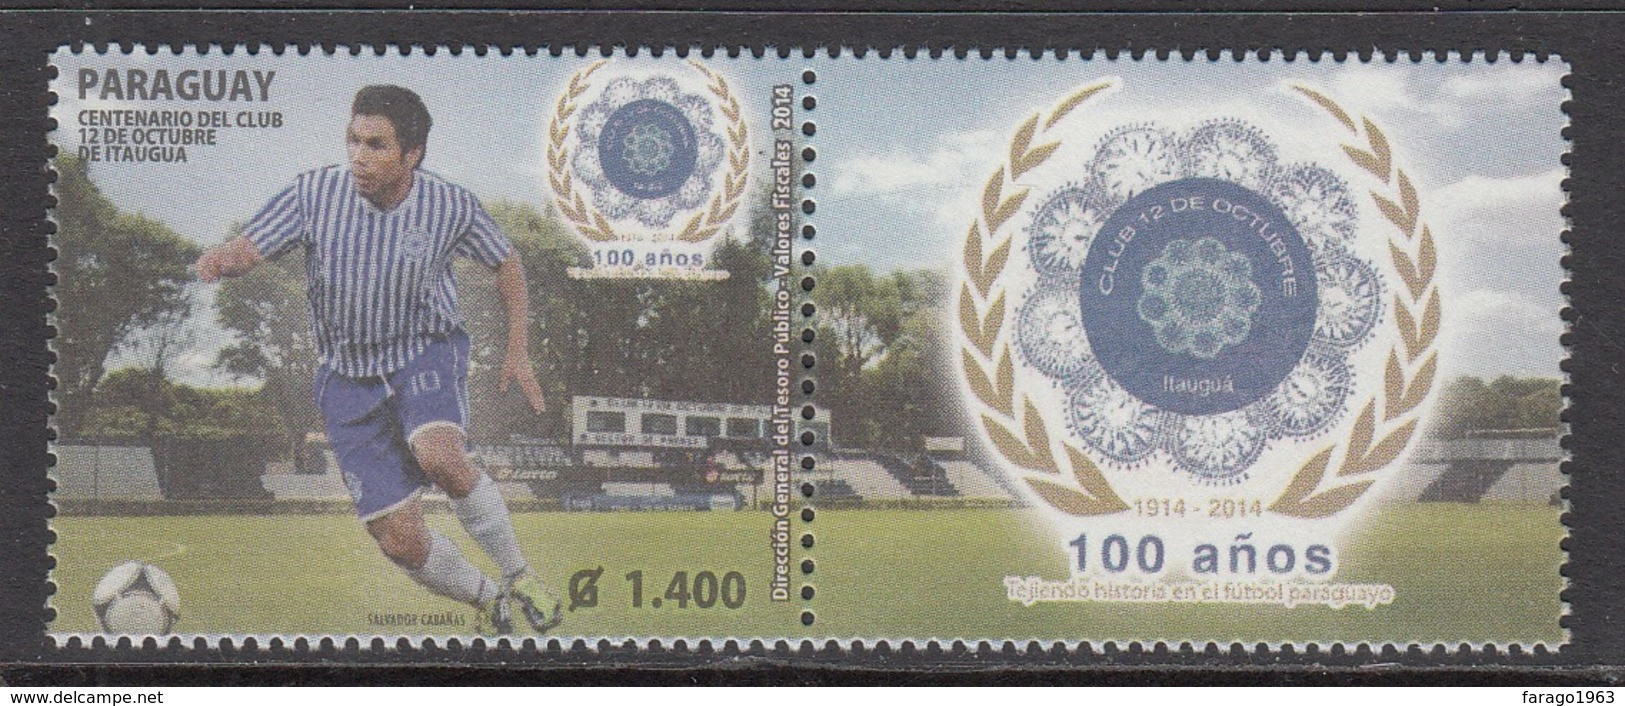 2014 Paraguay Cabanas Football  Complete Set Of 1 + Tab MNH - Paraguay